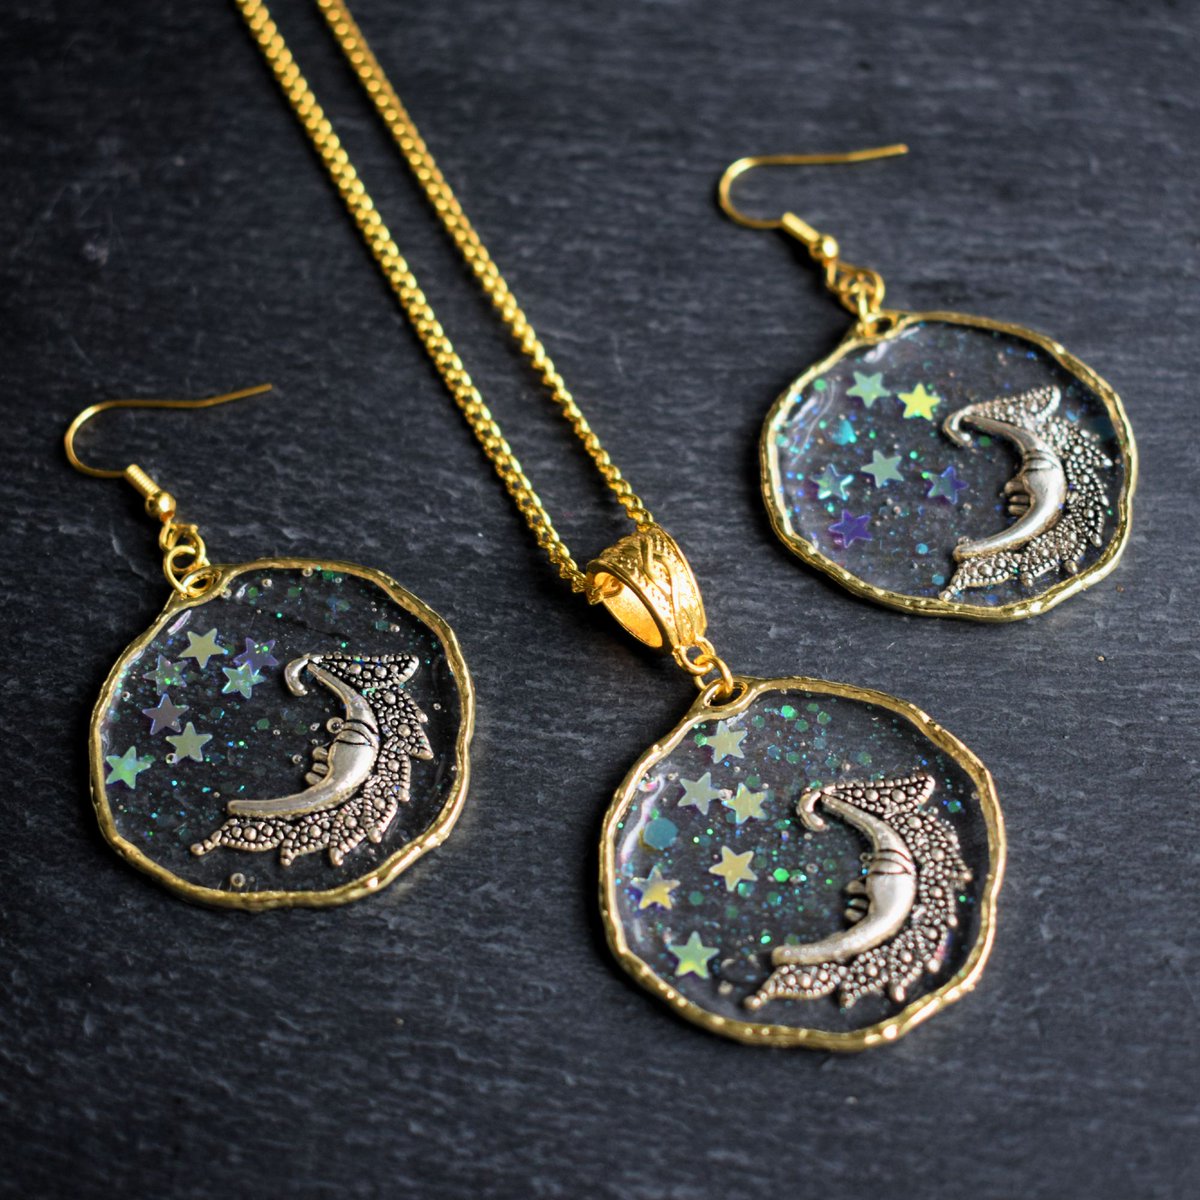 Add a little celestial twinkle with this lovely moon and stars necklace and earrings set! #moon #necklace #giftideas #shopindie bluebirdsanddaisies.etsy.com/listing/167335…